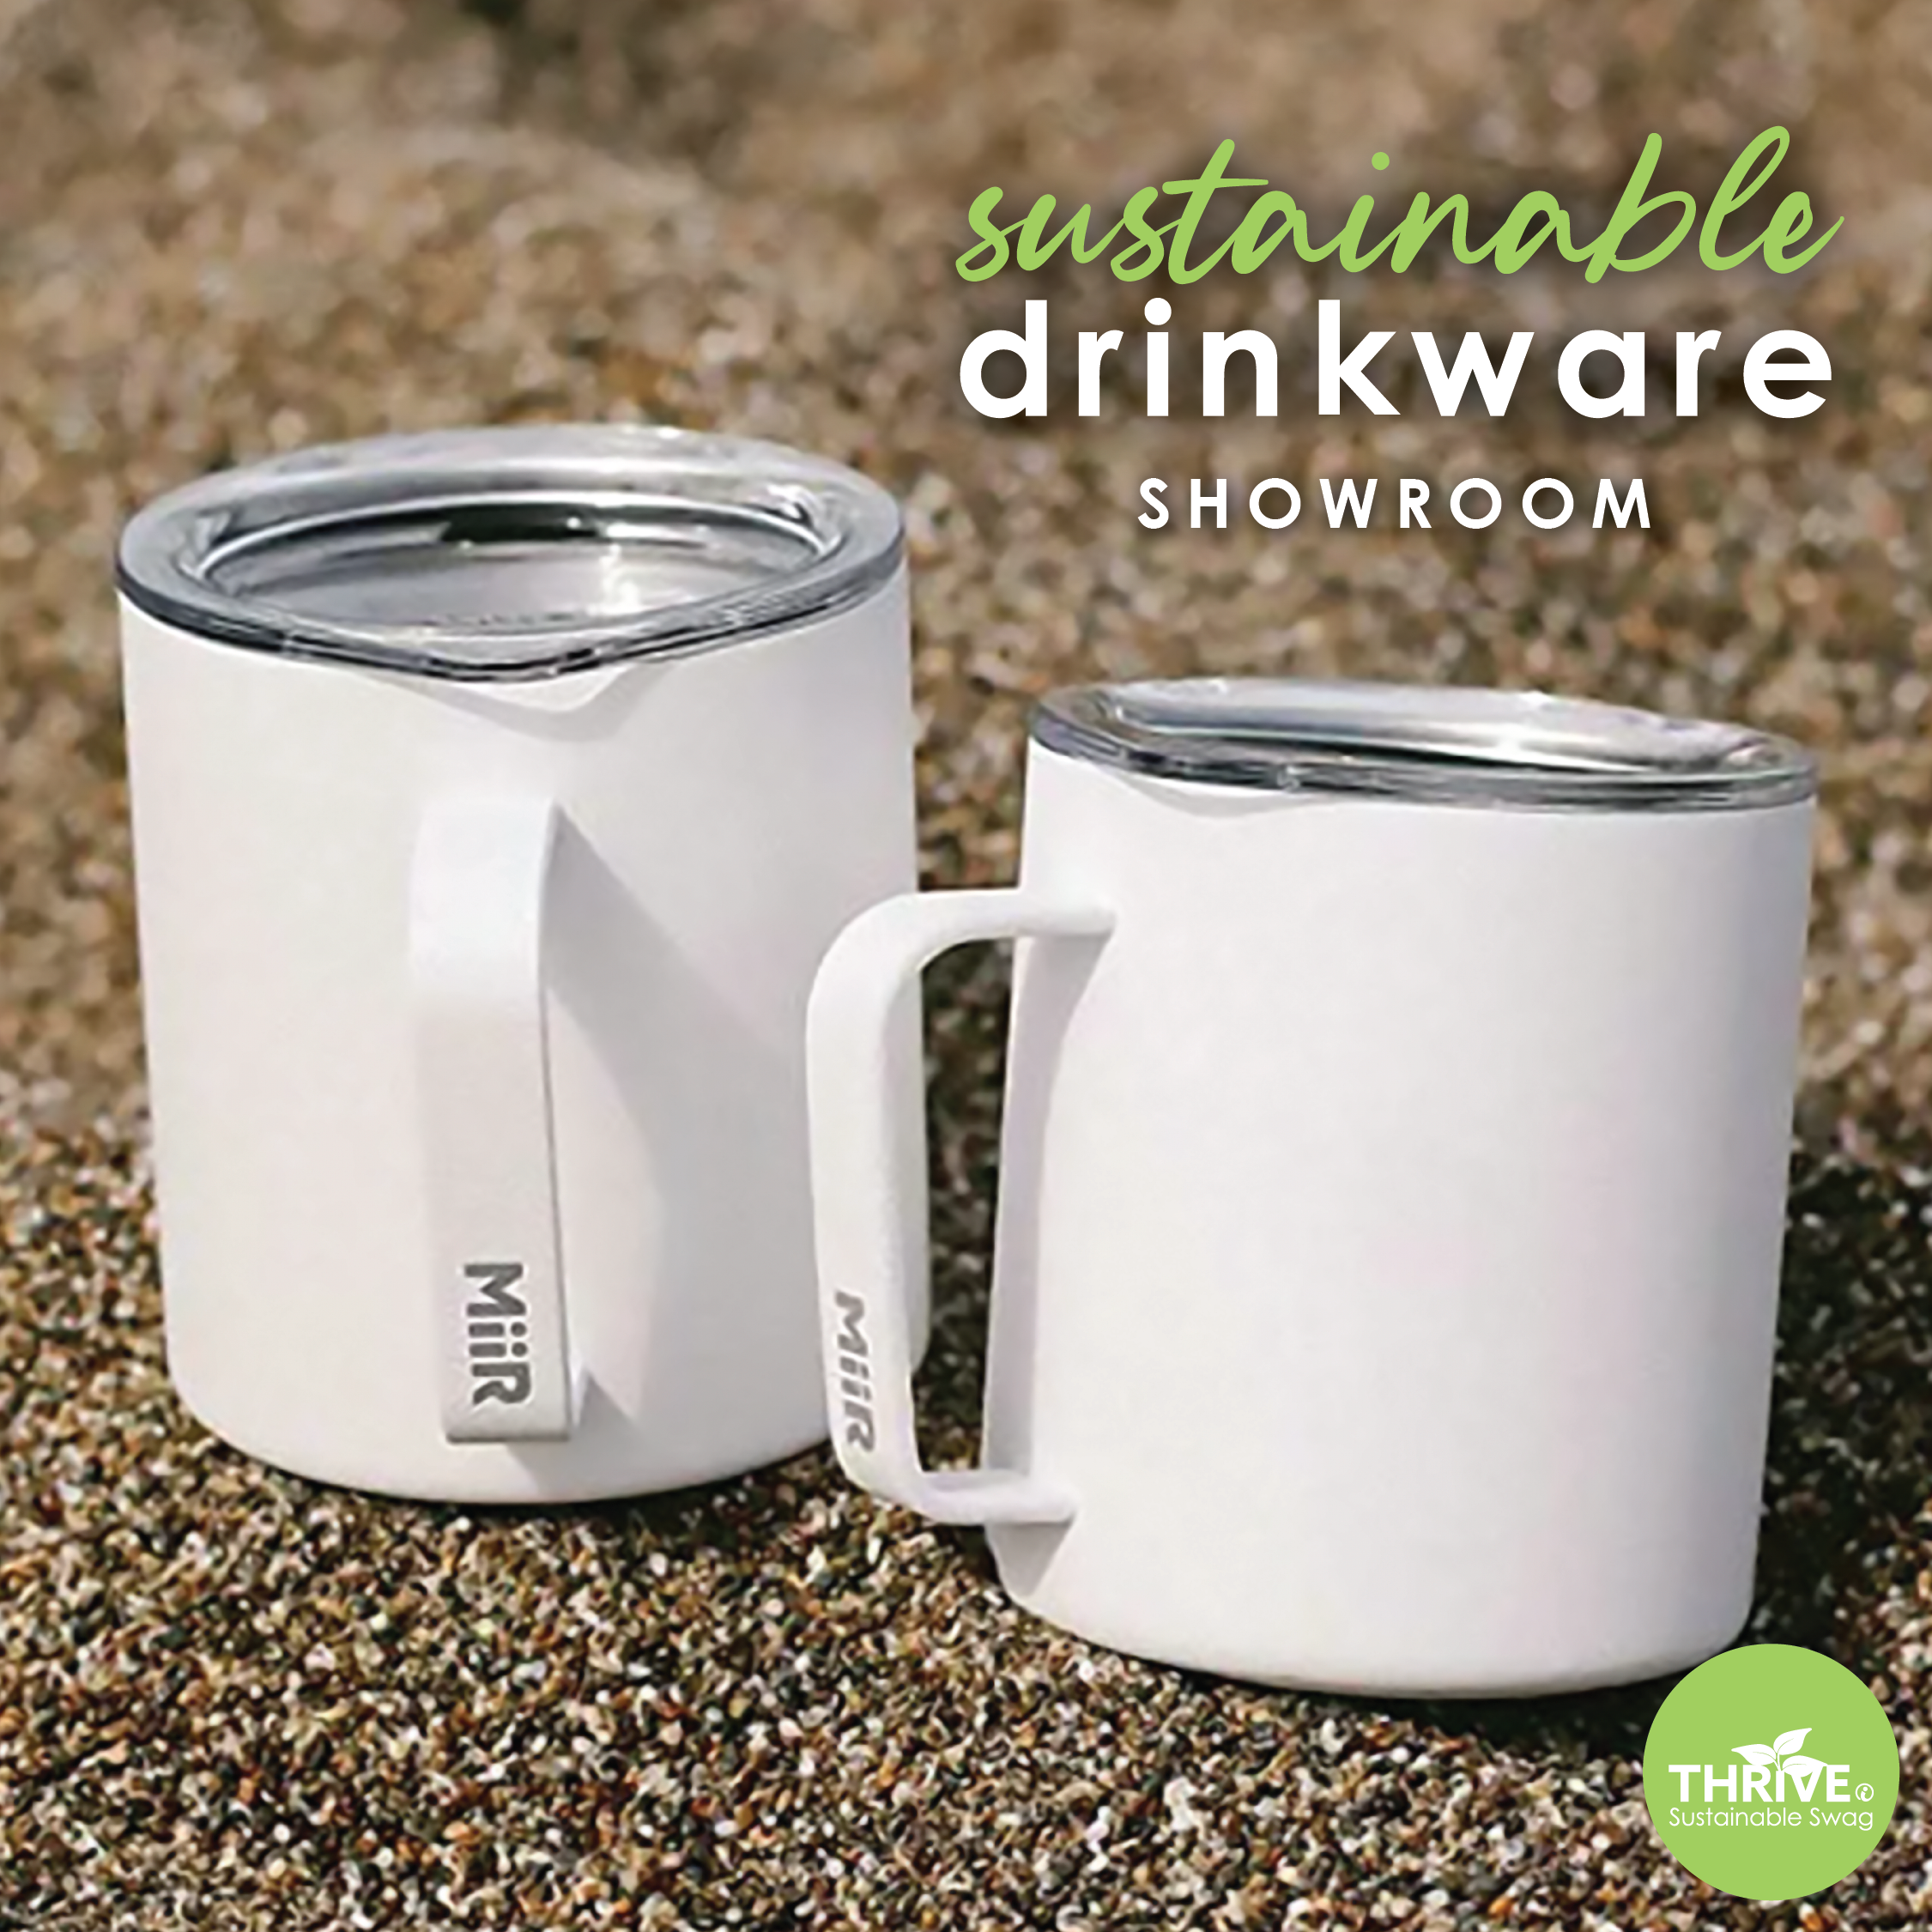 Image of two camper mugs with lids sitting in the sand with text that says Sustainable Drinkware Showroom.